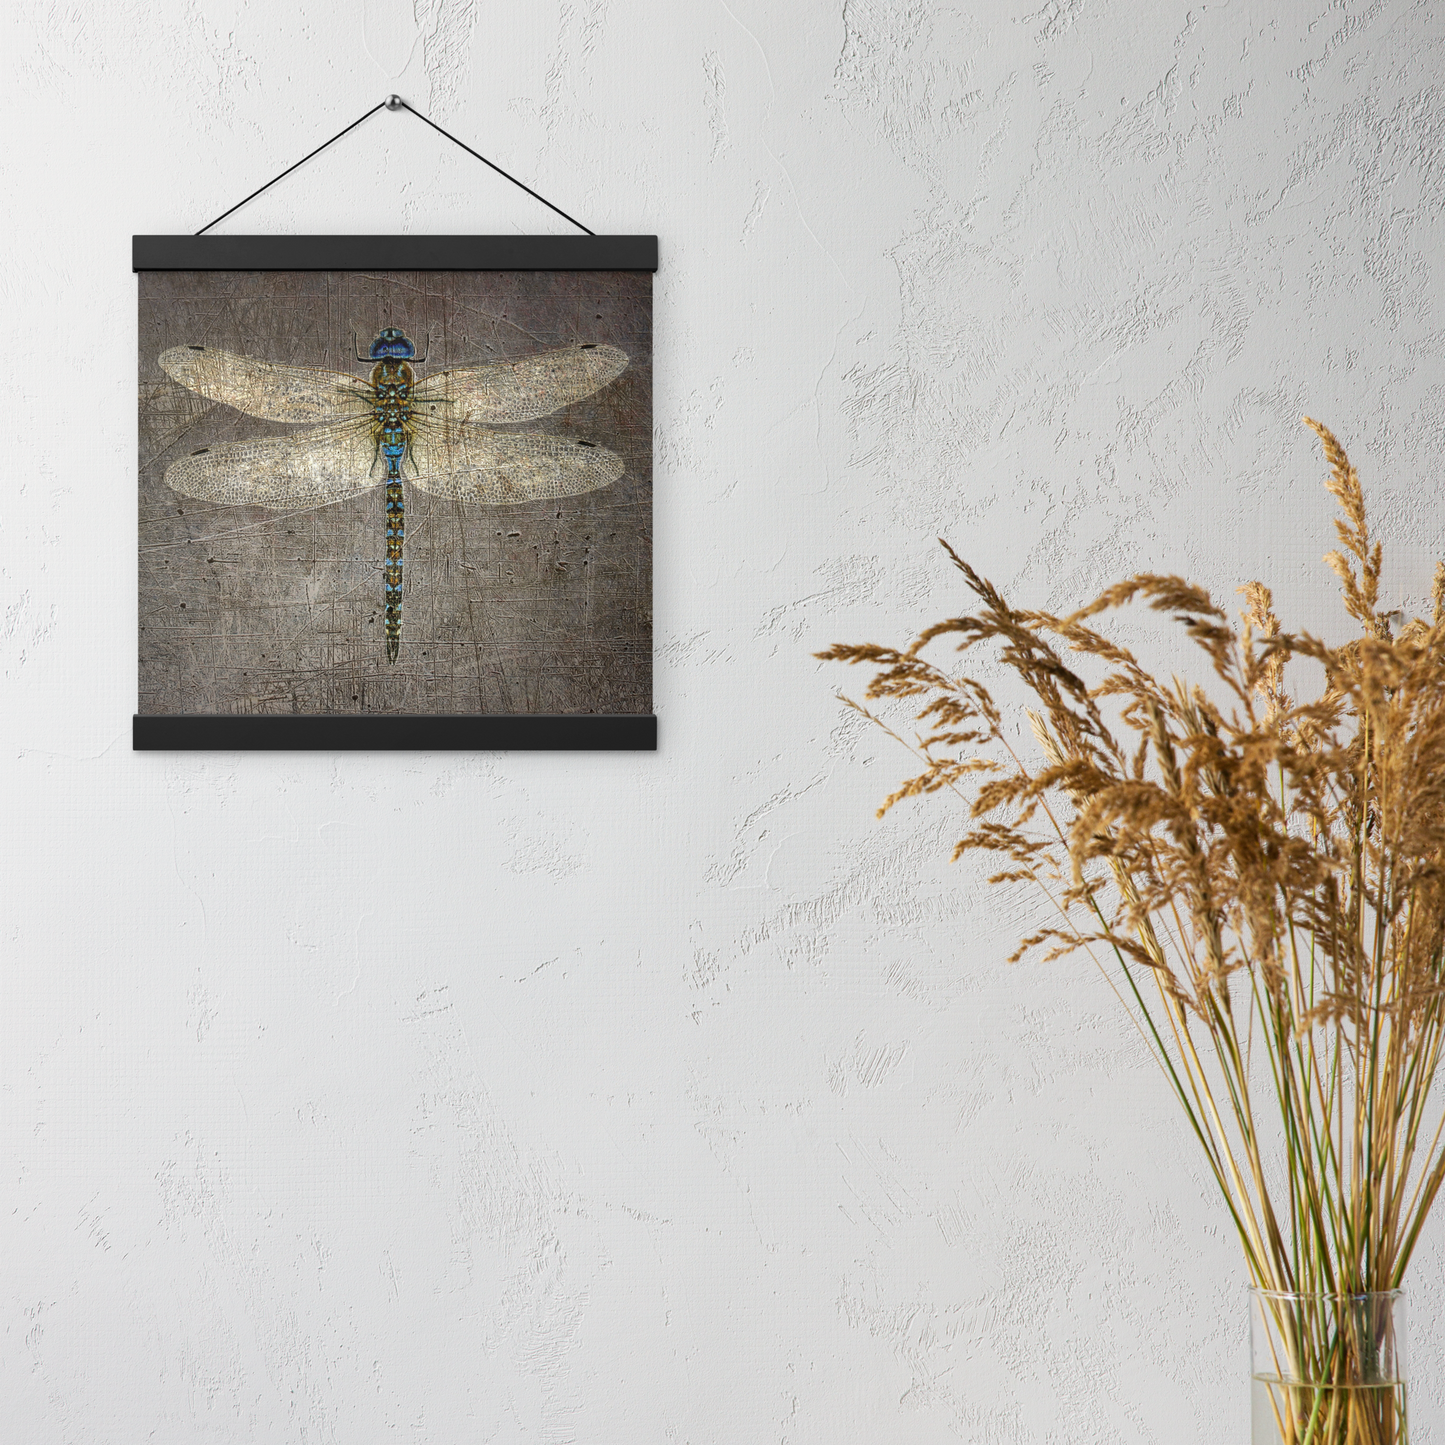 Dragonfly Themed Wall Hanging Dragonfly on Distressed Stone Background Print on Archival Paper with Magnetic Wood Hangers 12x12 hung